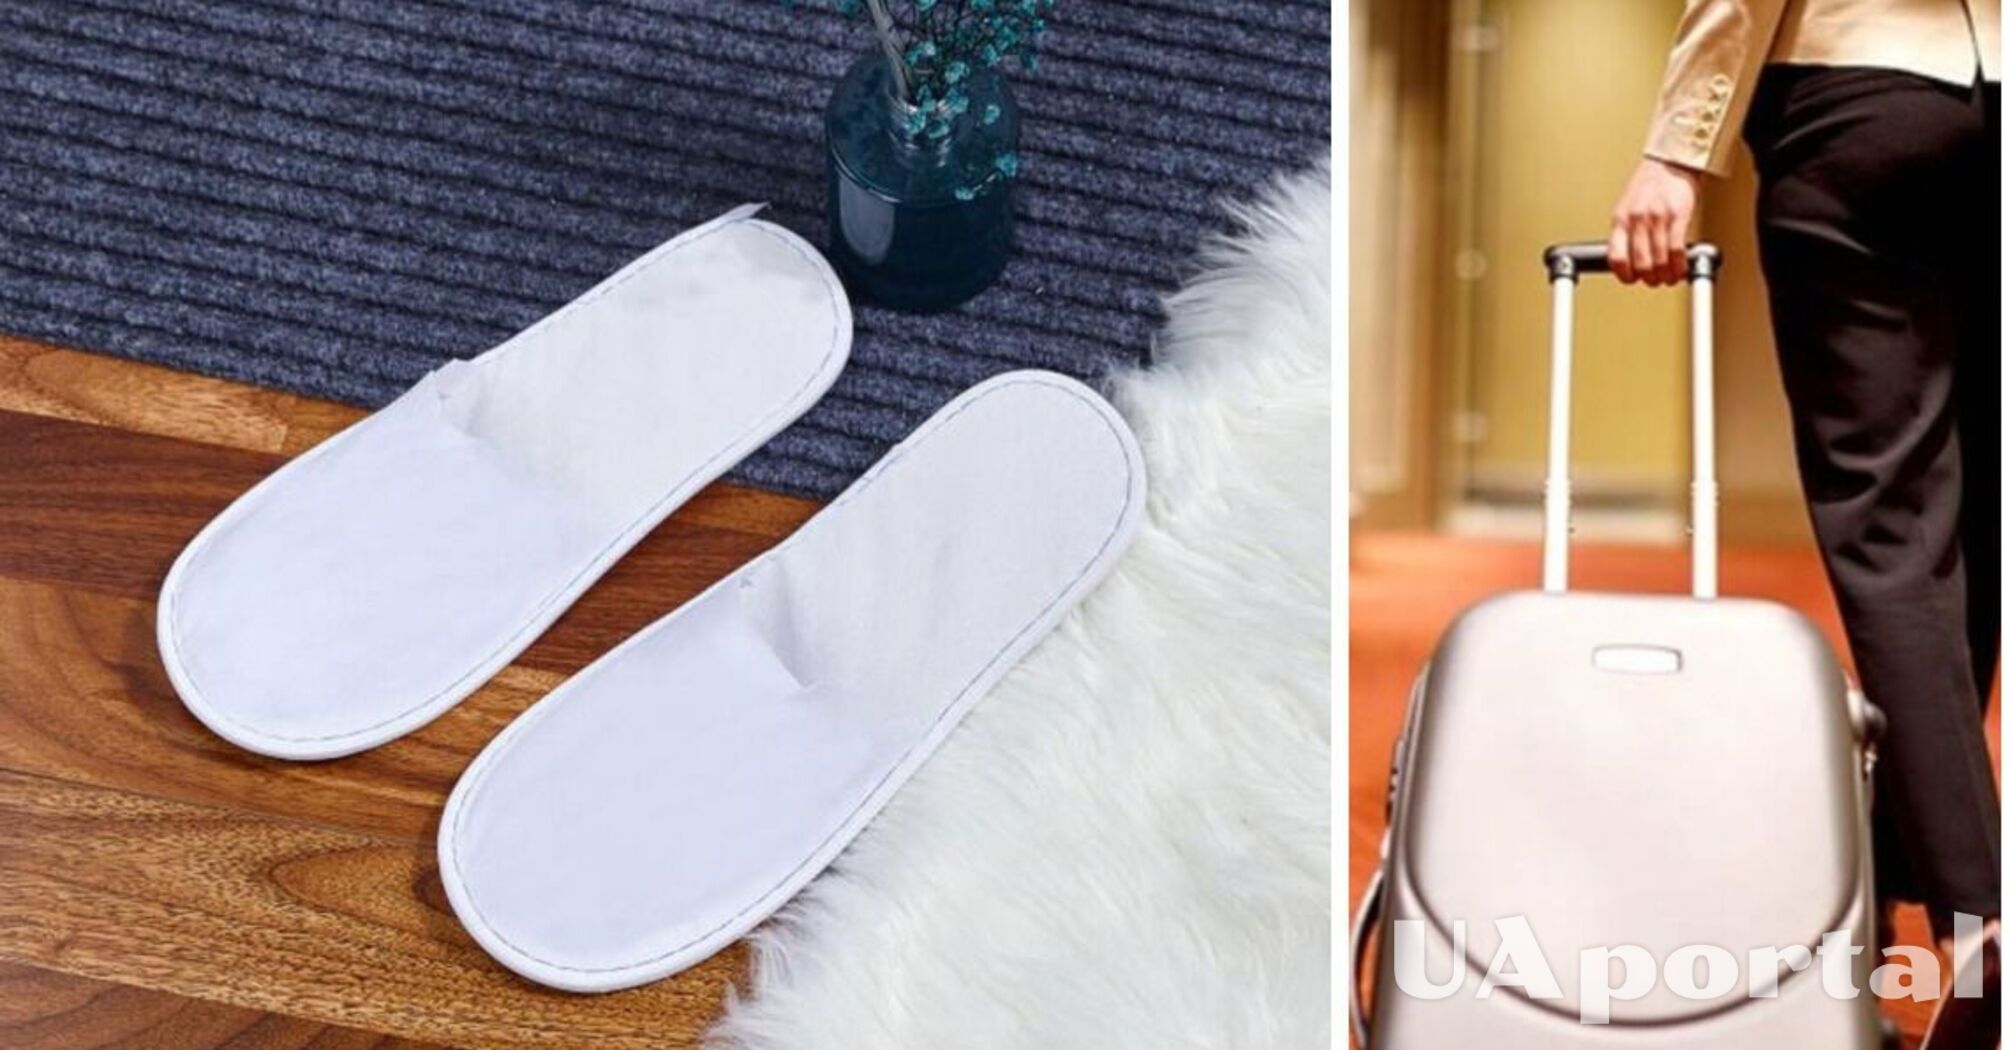 So that your conscience doesn't hurt: Is it possible to take slippers and hygiene products from hotels